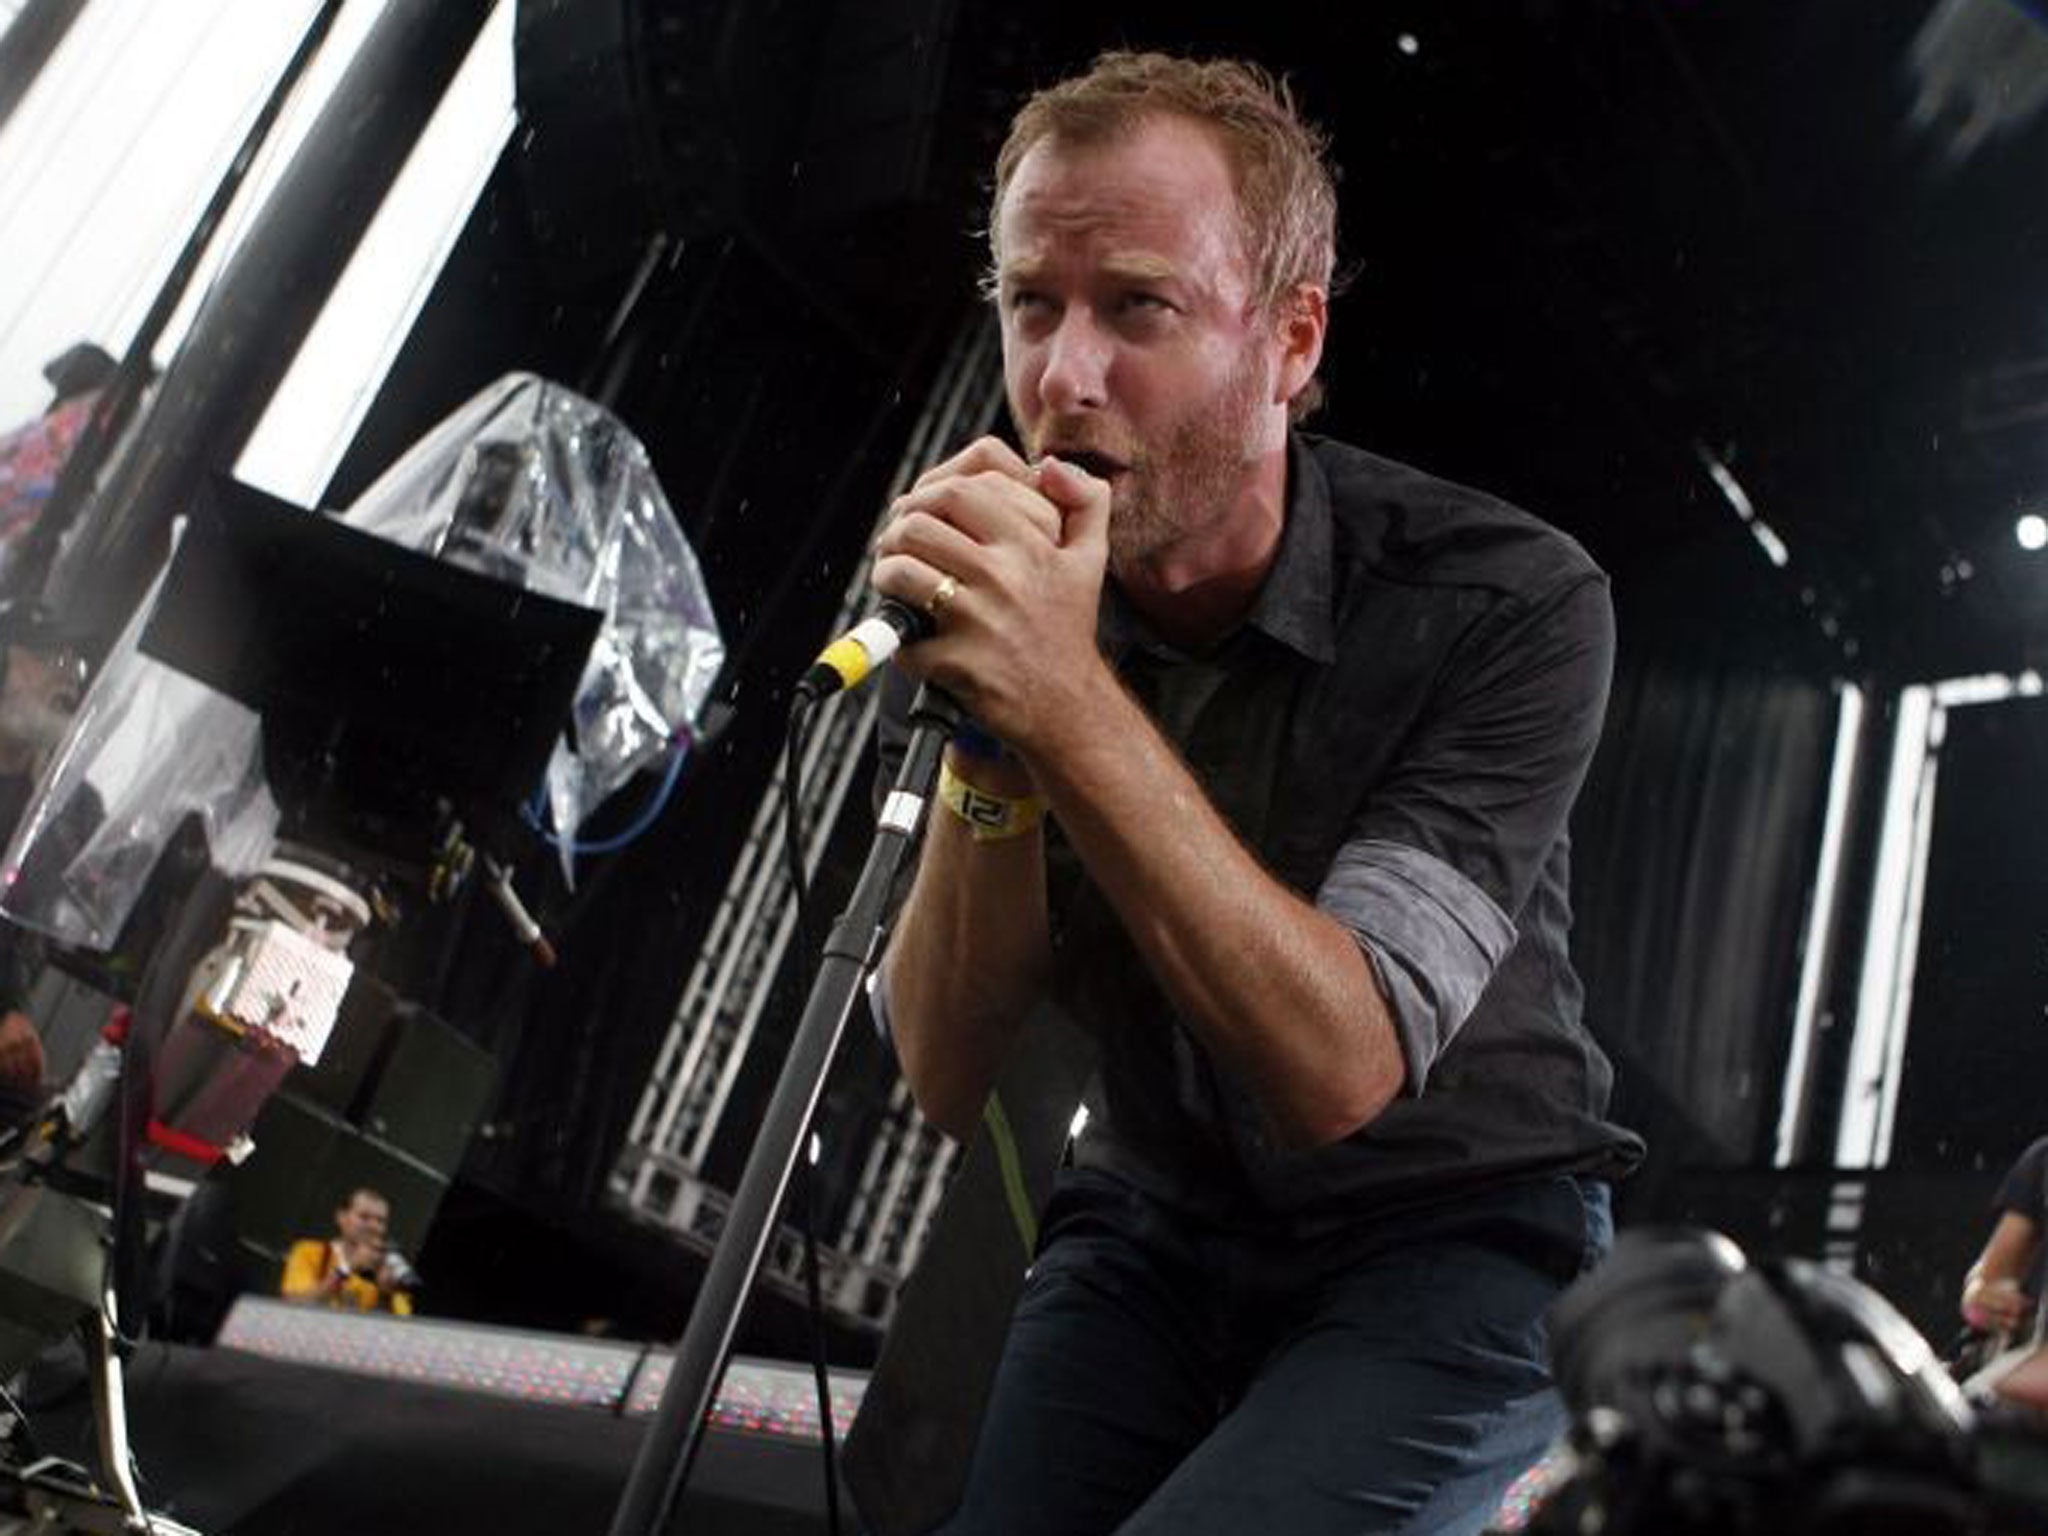 “It's important for us that the show's great every night": The National's Matt Berninger